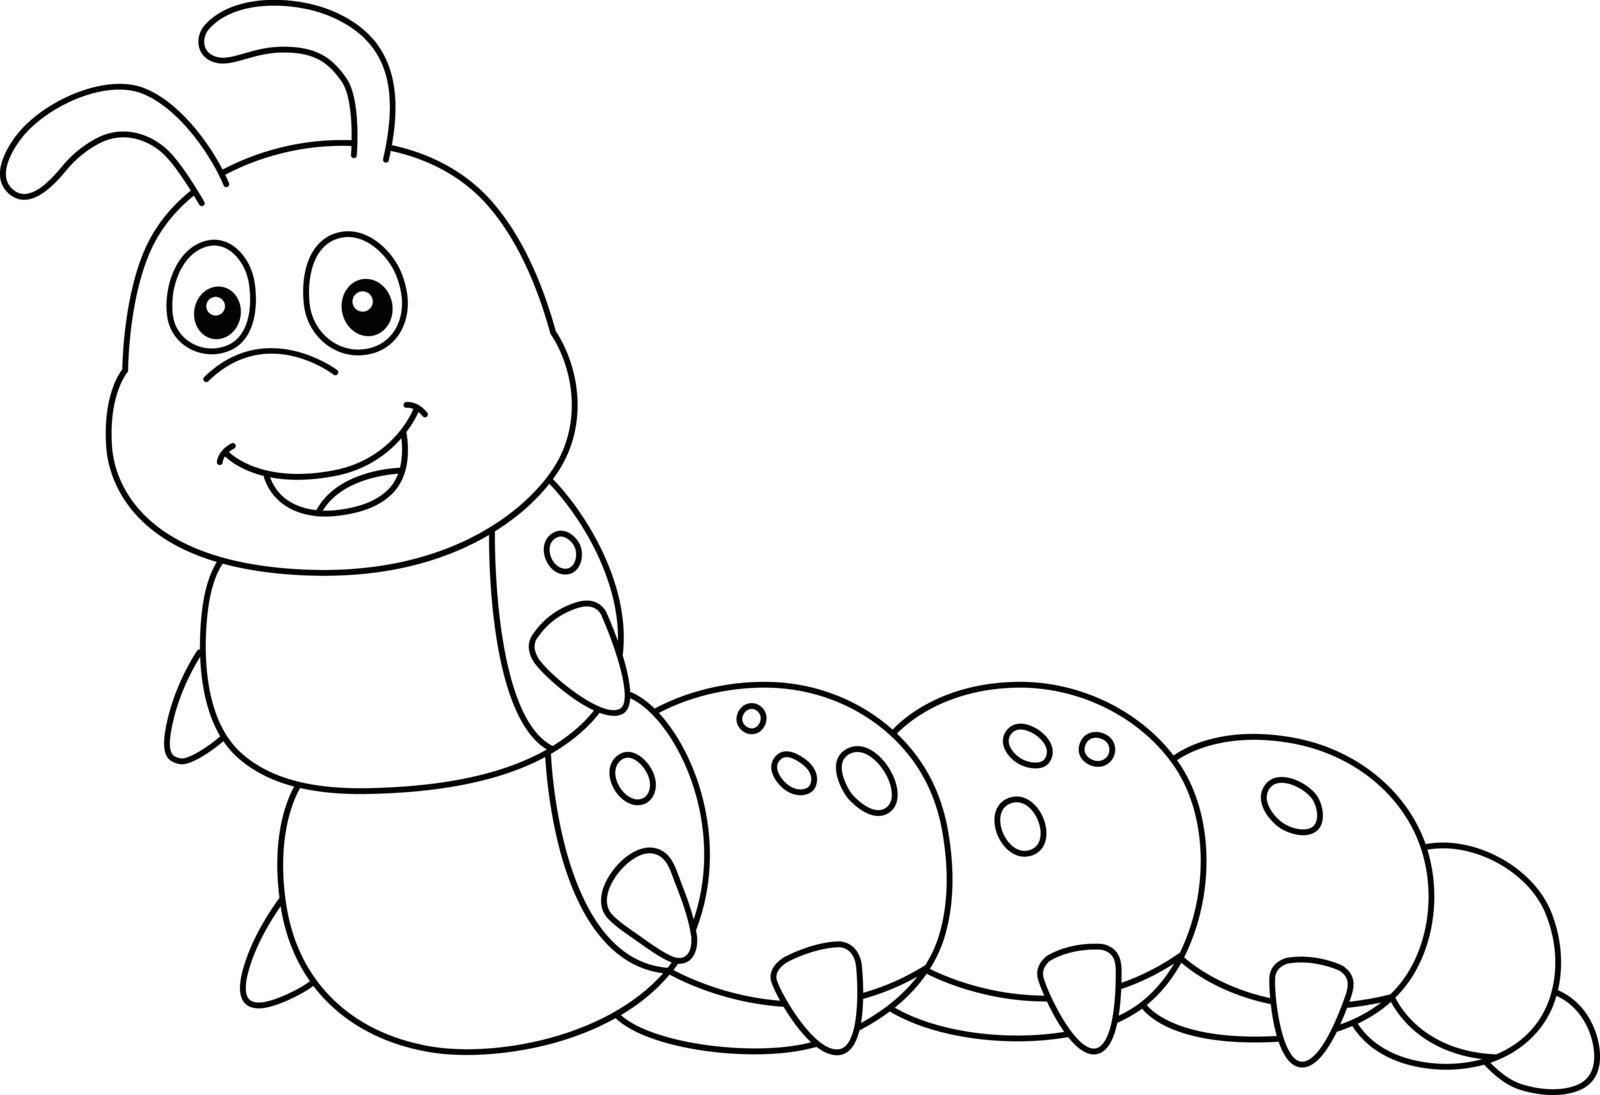 Caterpillar Coloring Page Isolated for Kids by abbydesign